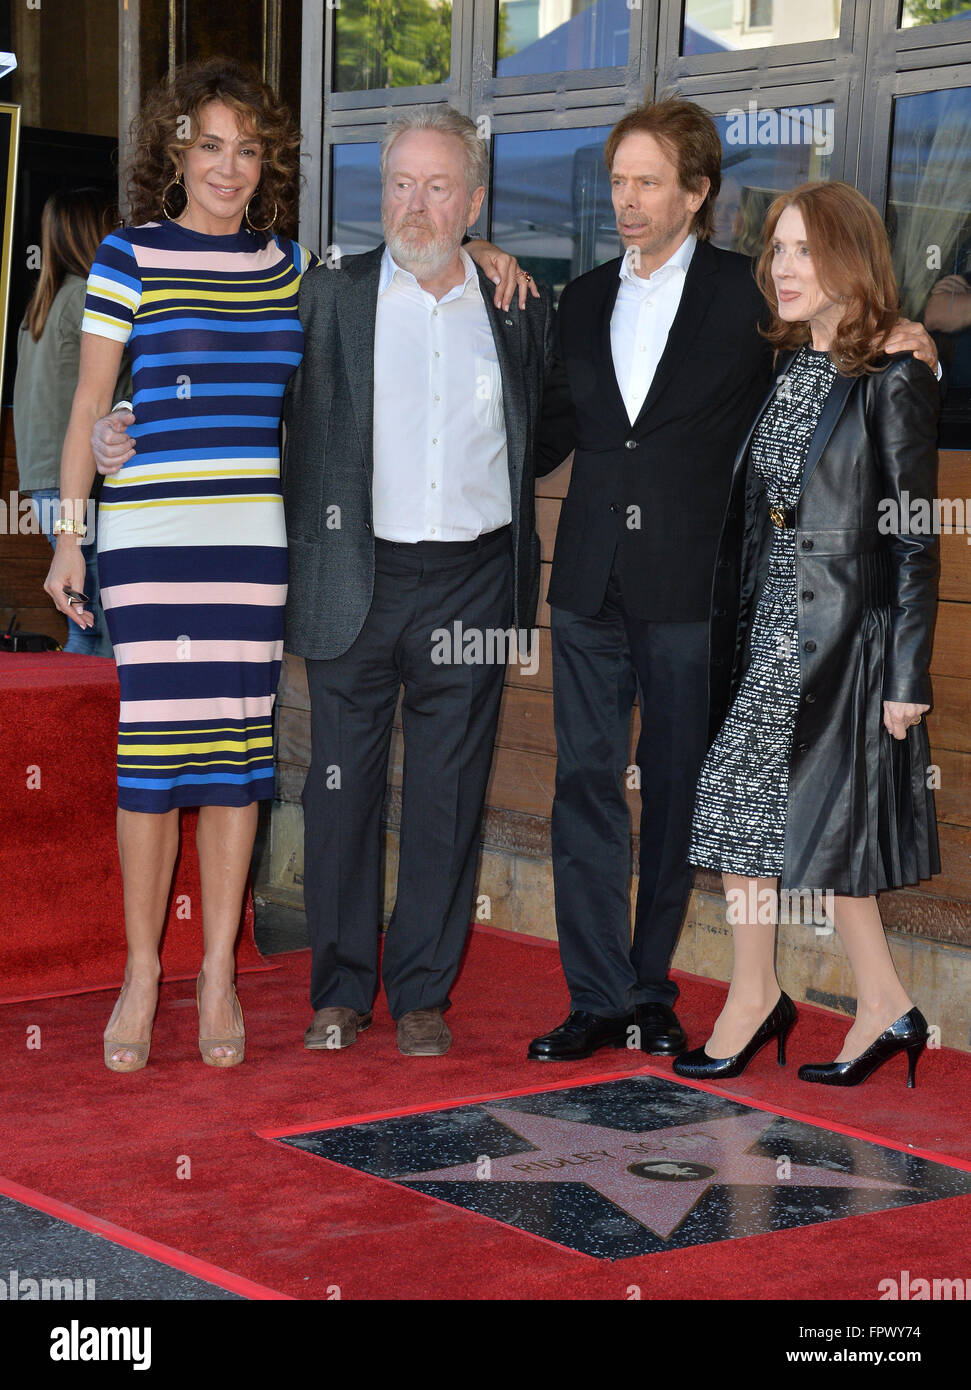 LOS ANGELES, CA - NOVEMBER 5, 2015: Director Ridley Scott & partner Giannina Facio with producer Jerry Bruckheimer & wife Linda on Hollywood Boulevard where he was honored with the 2,564th star on the Hollywood Walk of Fame. Stock Photo